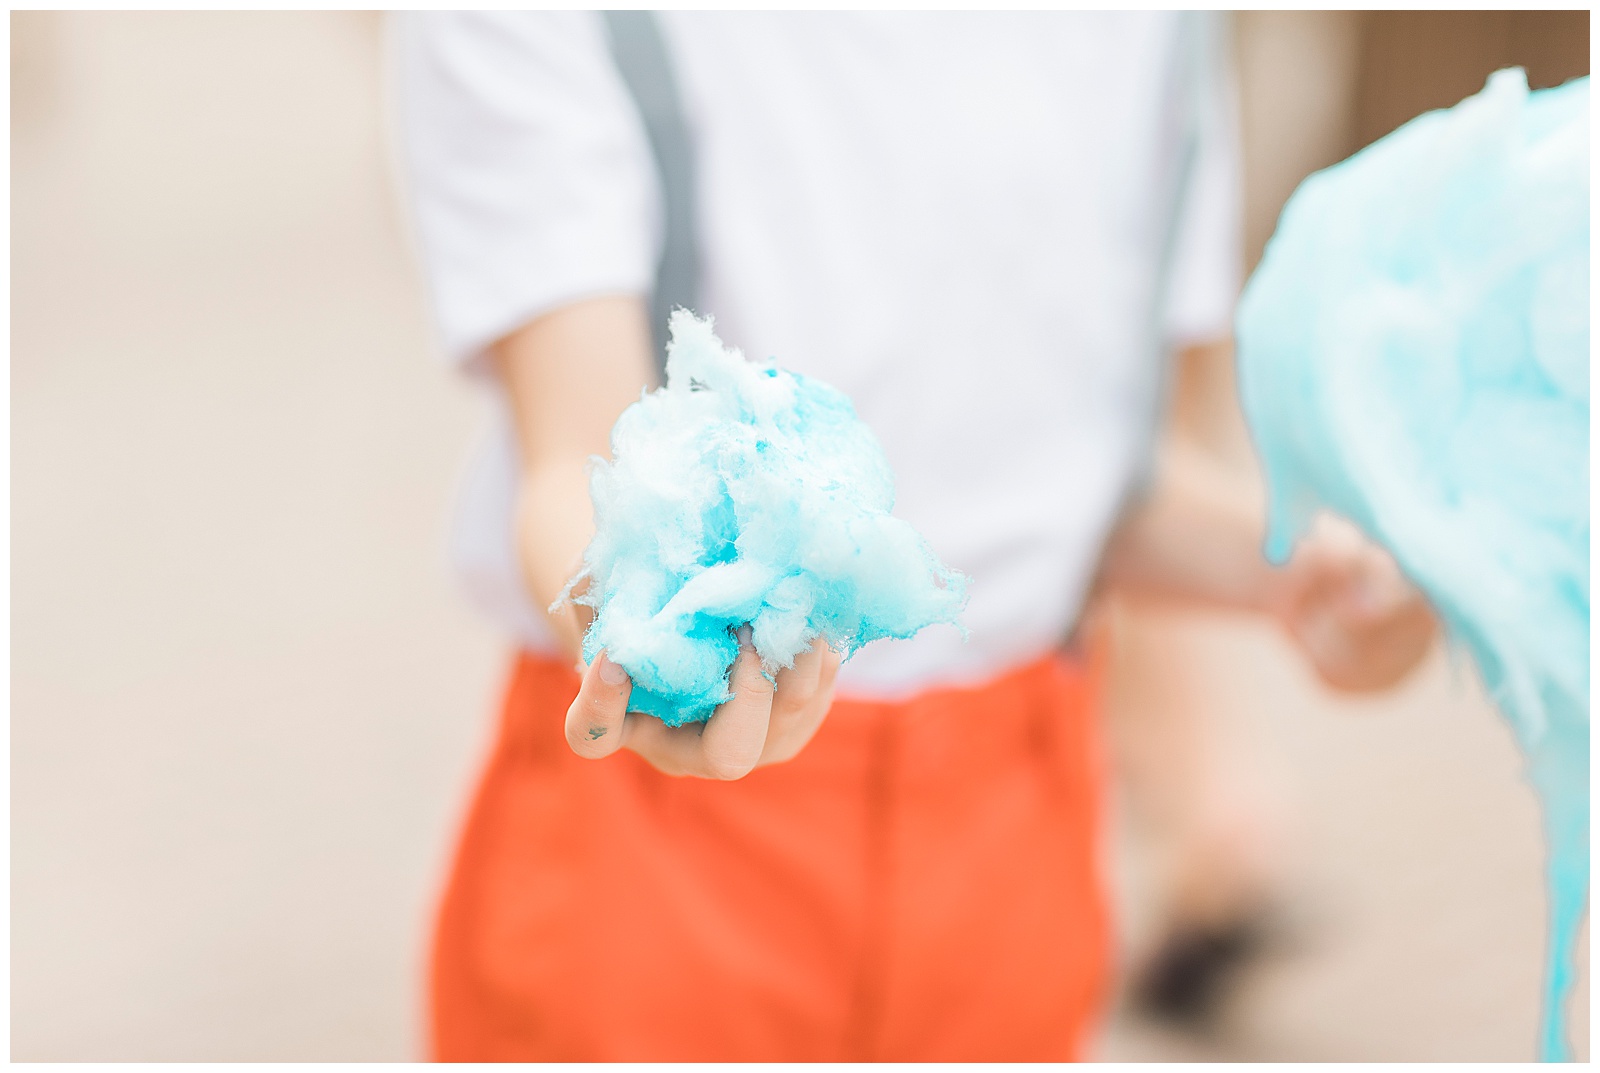 Kids photos with cotton candy